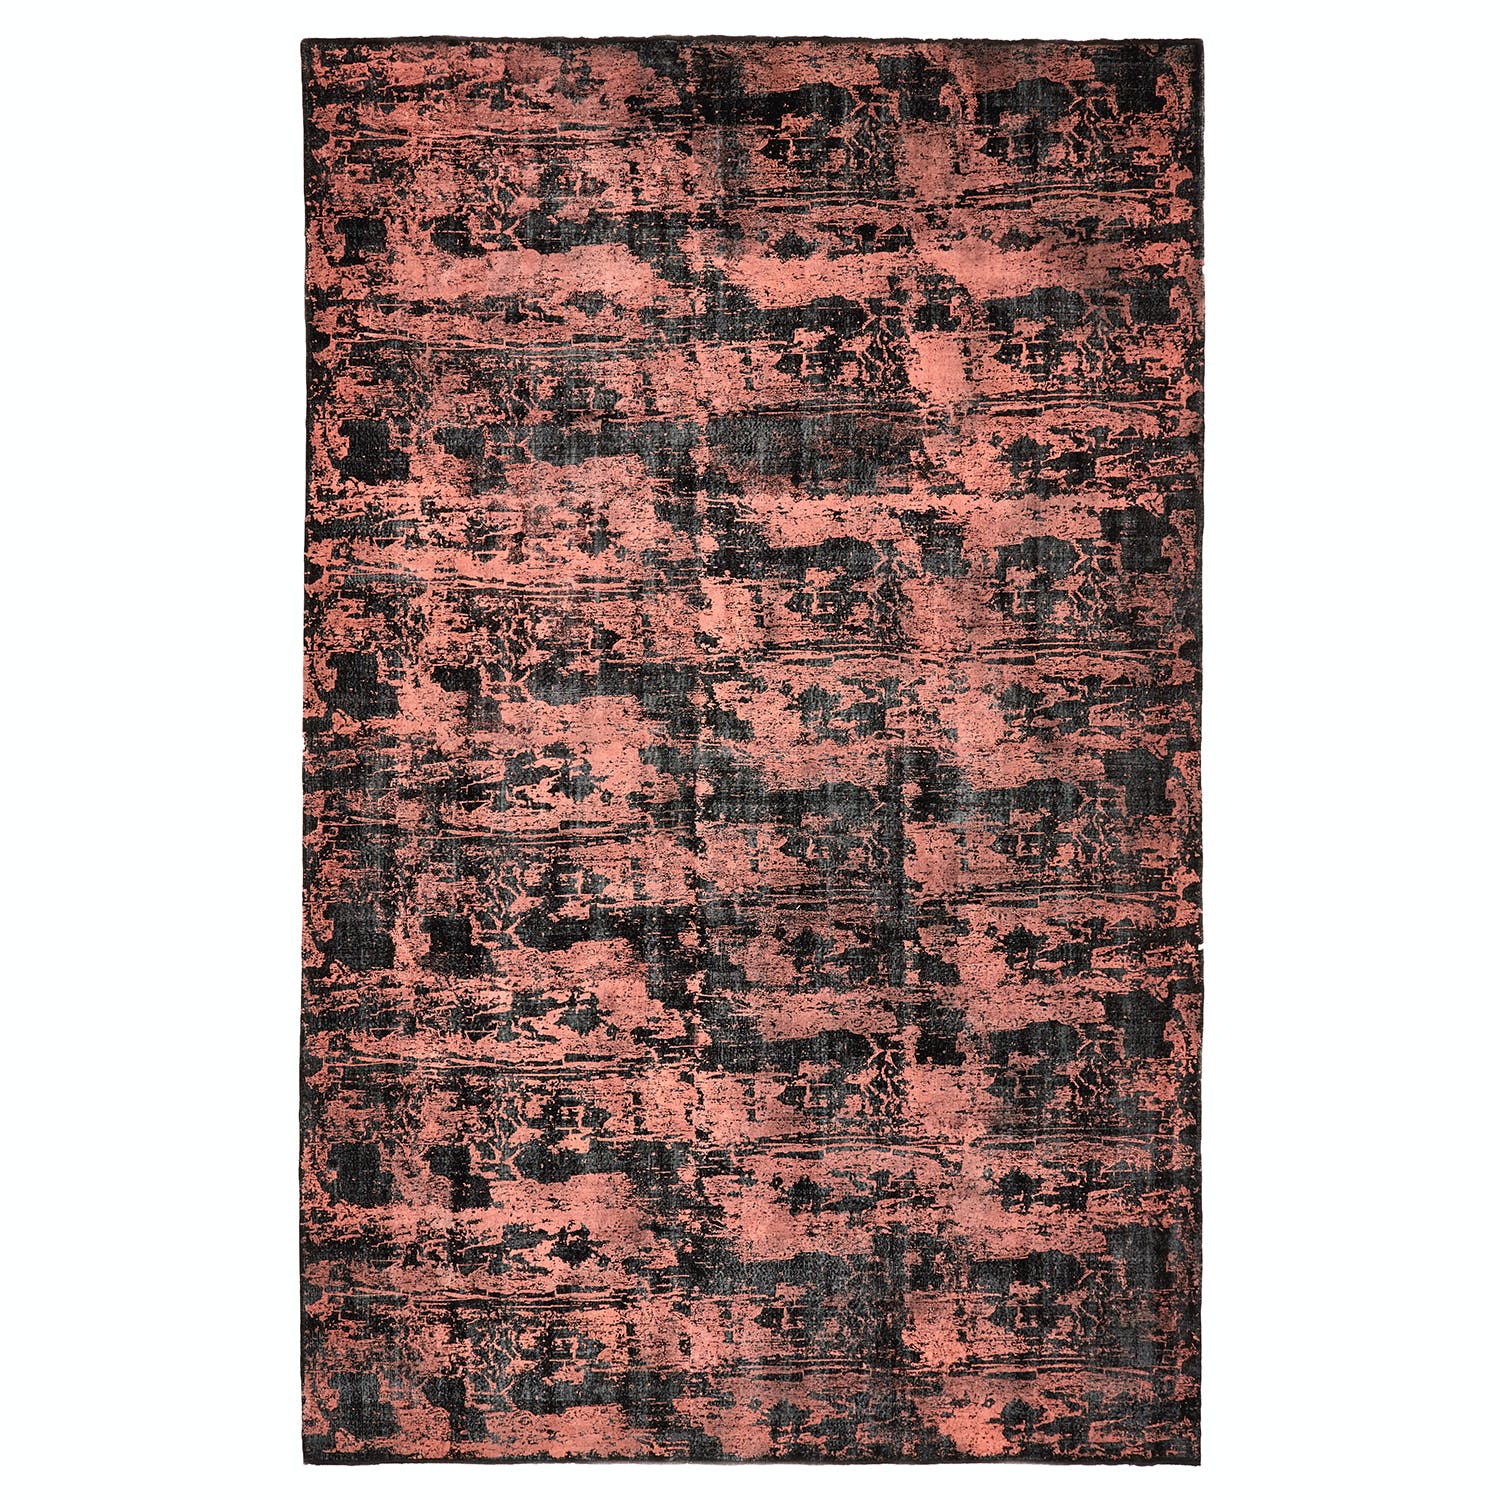 Rectangular rug with distressed texture and abstract black markings.